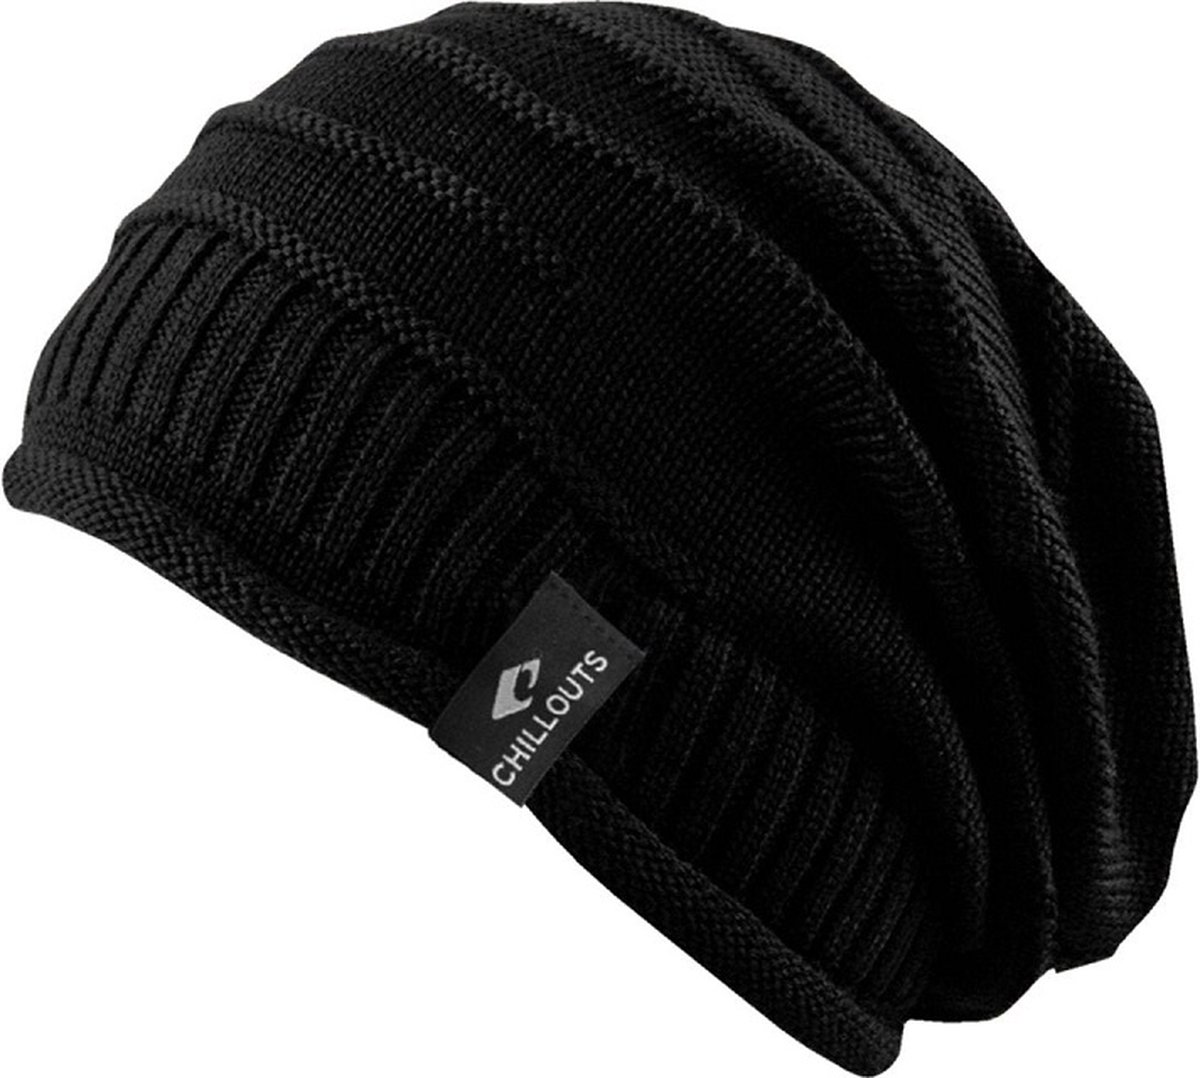 Chillouts beanie muts Erik met logo black in one size